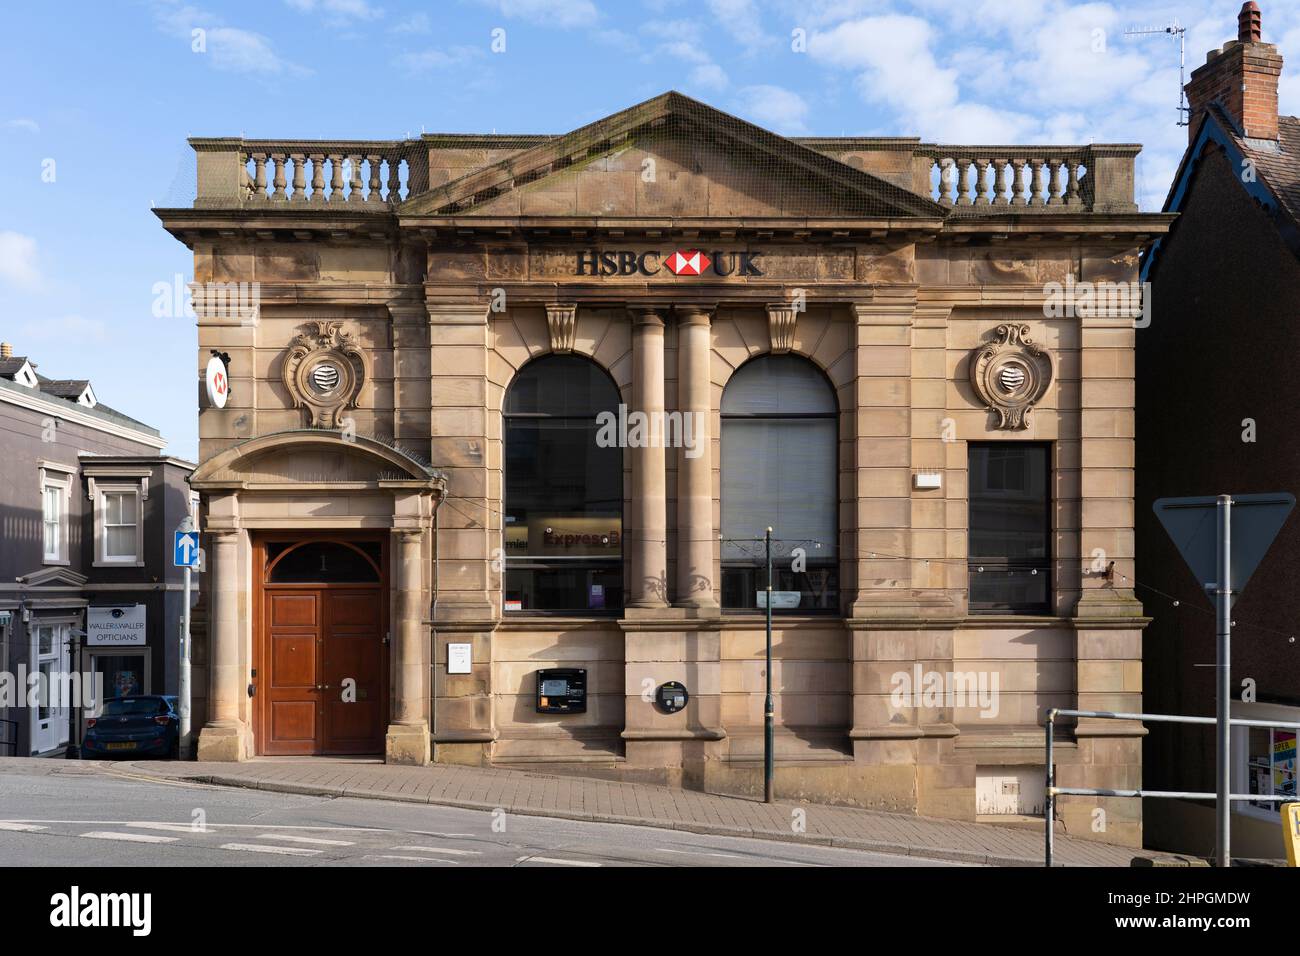 The Grade II listed building with a dressed stone frontage of a HSBC branch at 1 Church Street in Great Malvern, Worcestershire, England Stock Photo